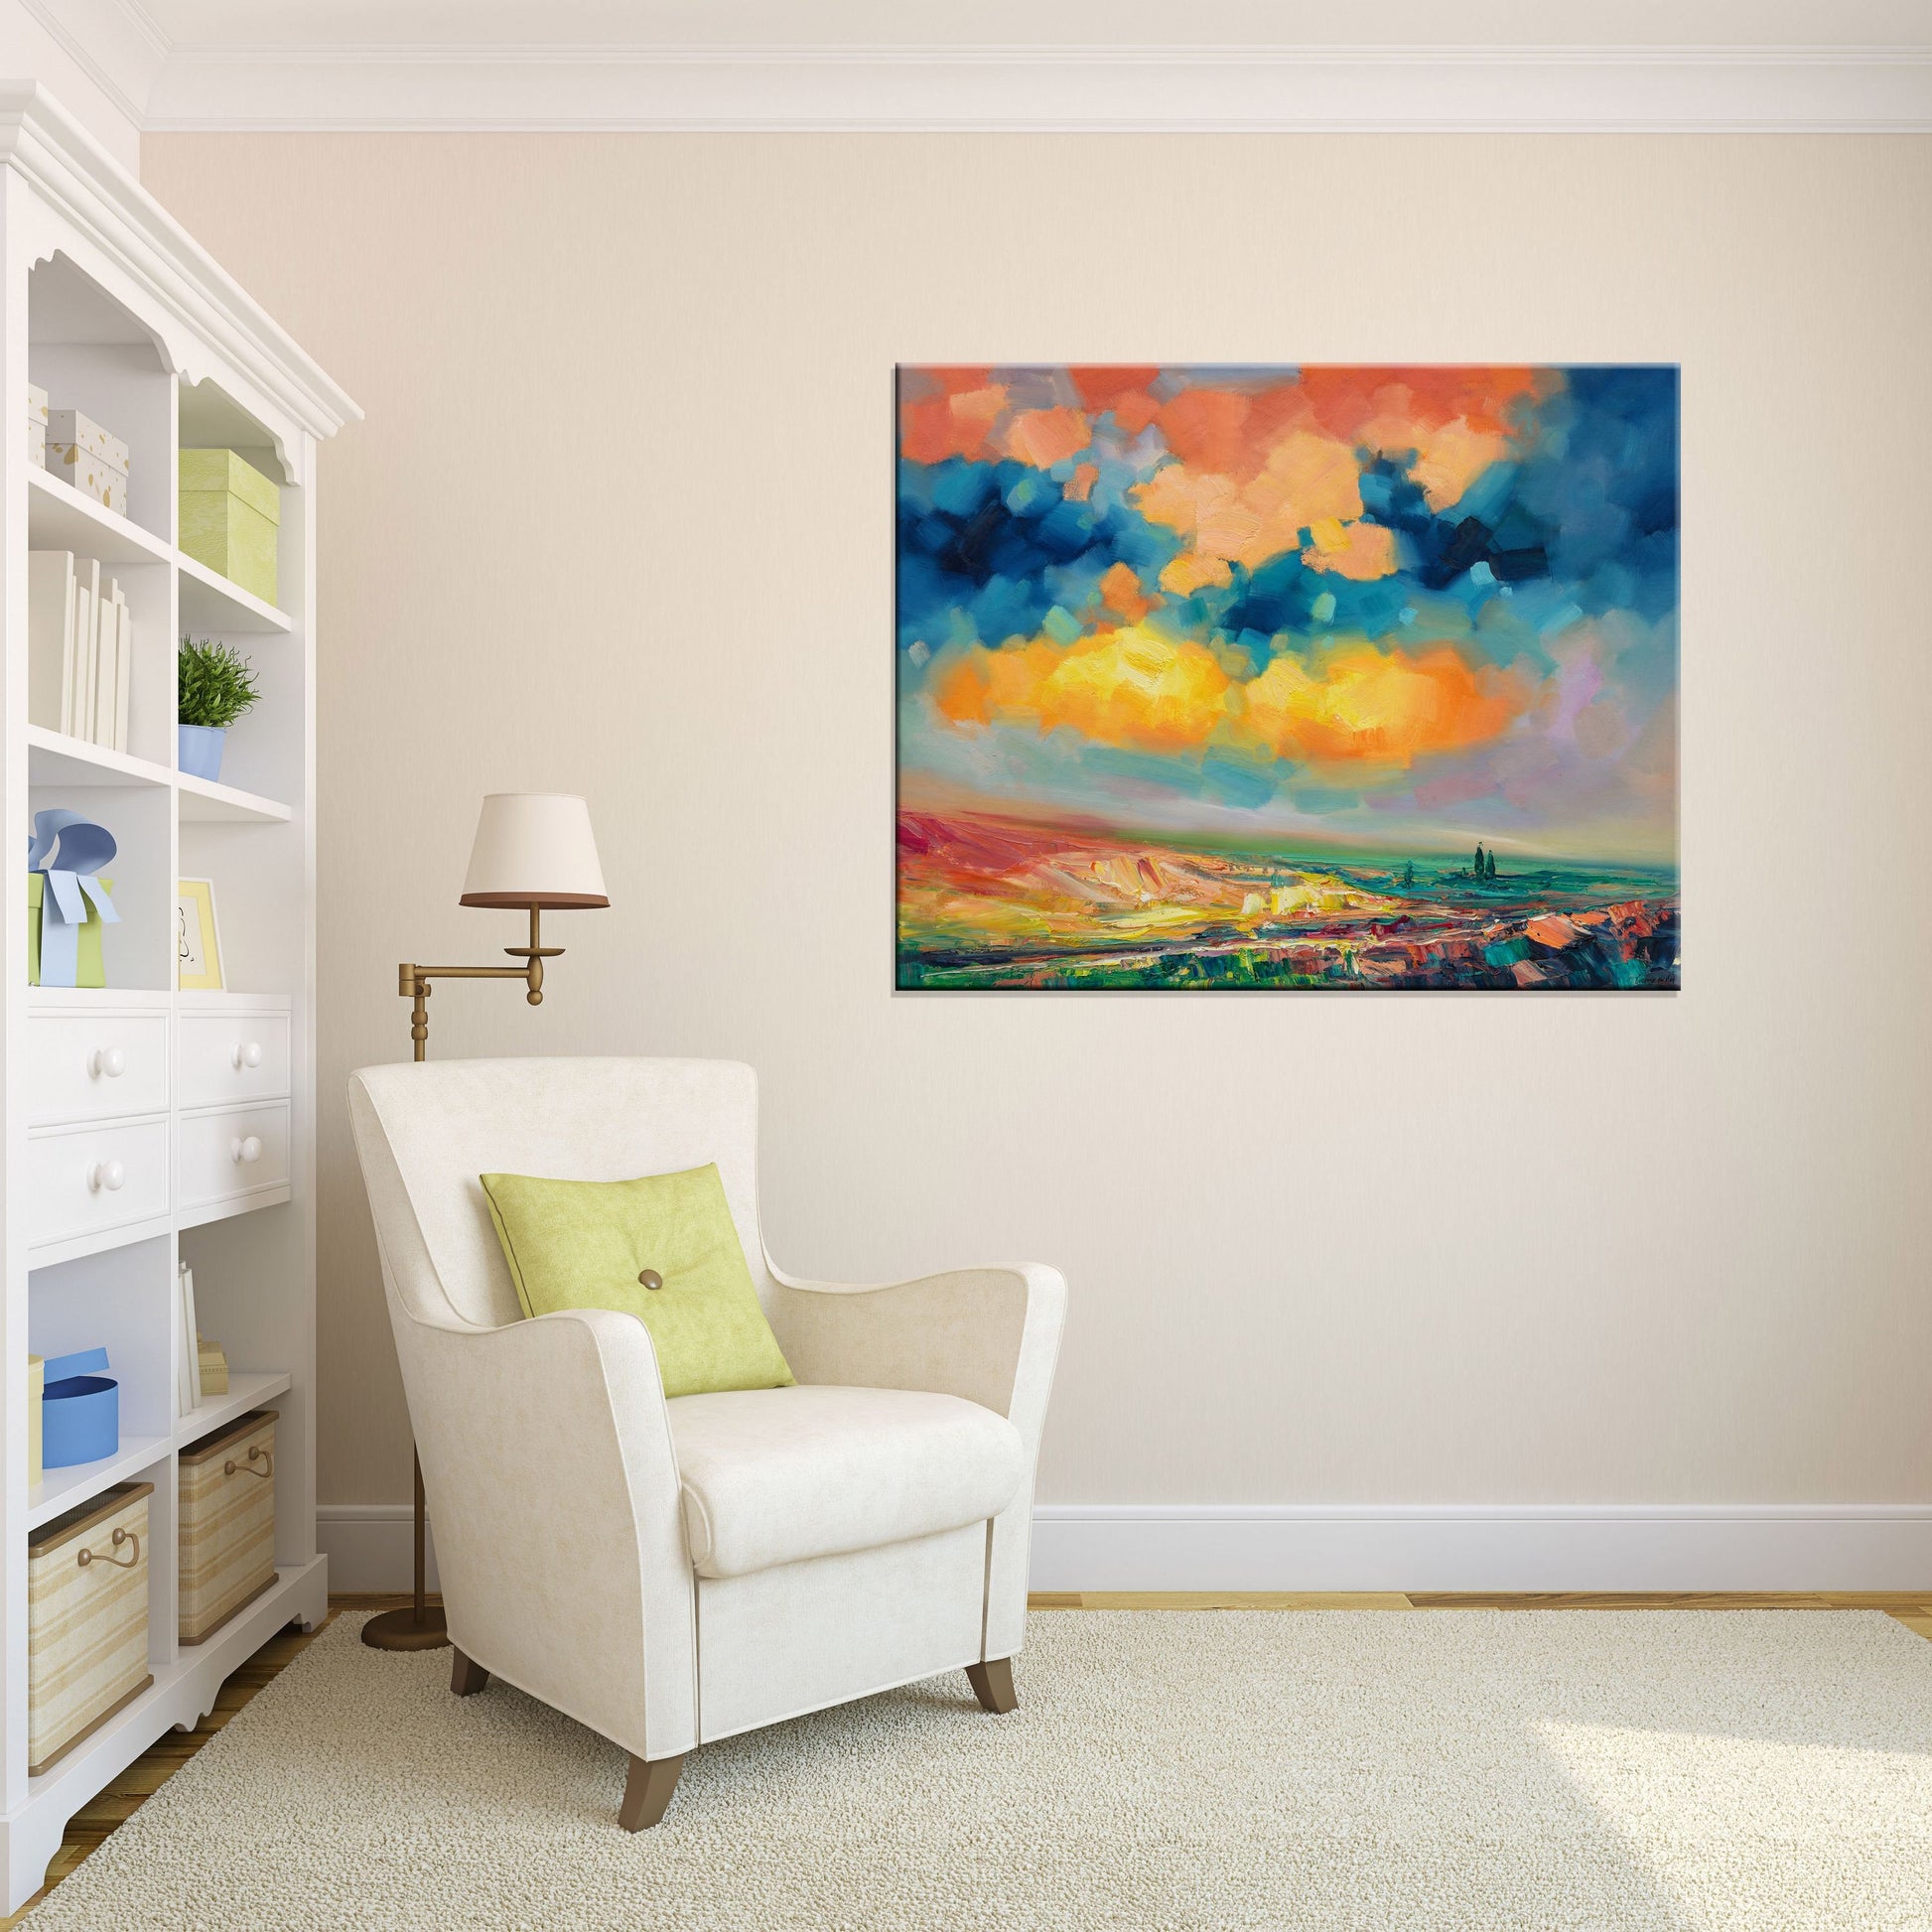 Abstract Landscape Oil Painting, Canvas Art, Paintings On Canvas, Large Landscape Paintings On Canvas, Framed Wall Art, Home Office Decor